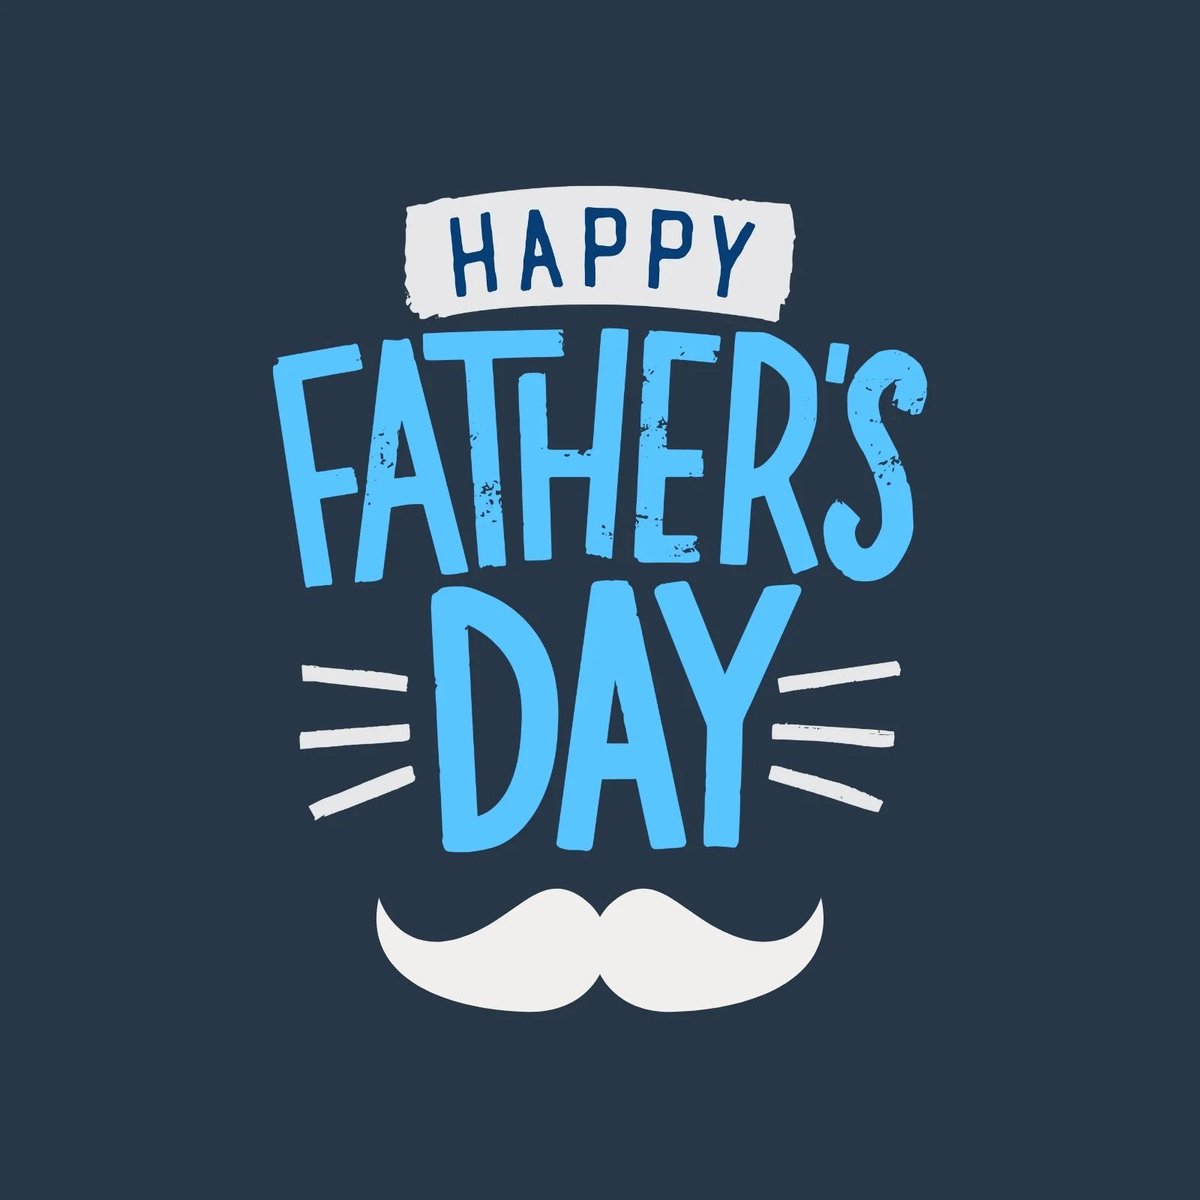 Brothers, here’s wishing you a happy Father’s Day. #21fathers #endalldv #fathersday #brotherhood #call1300008602